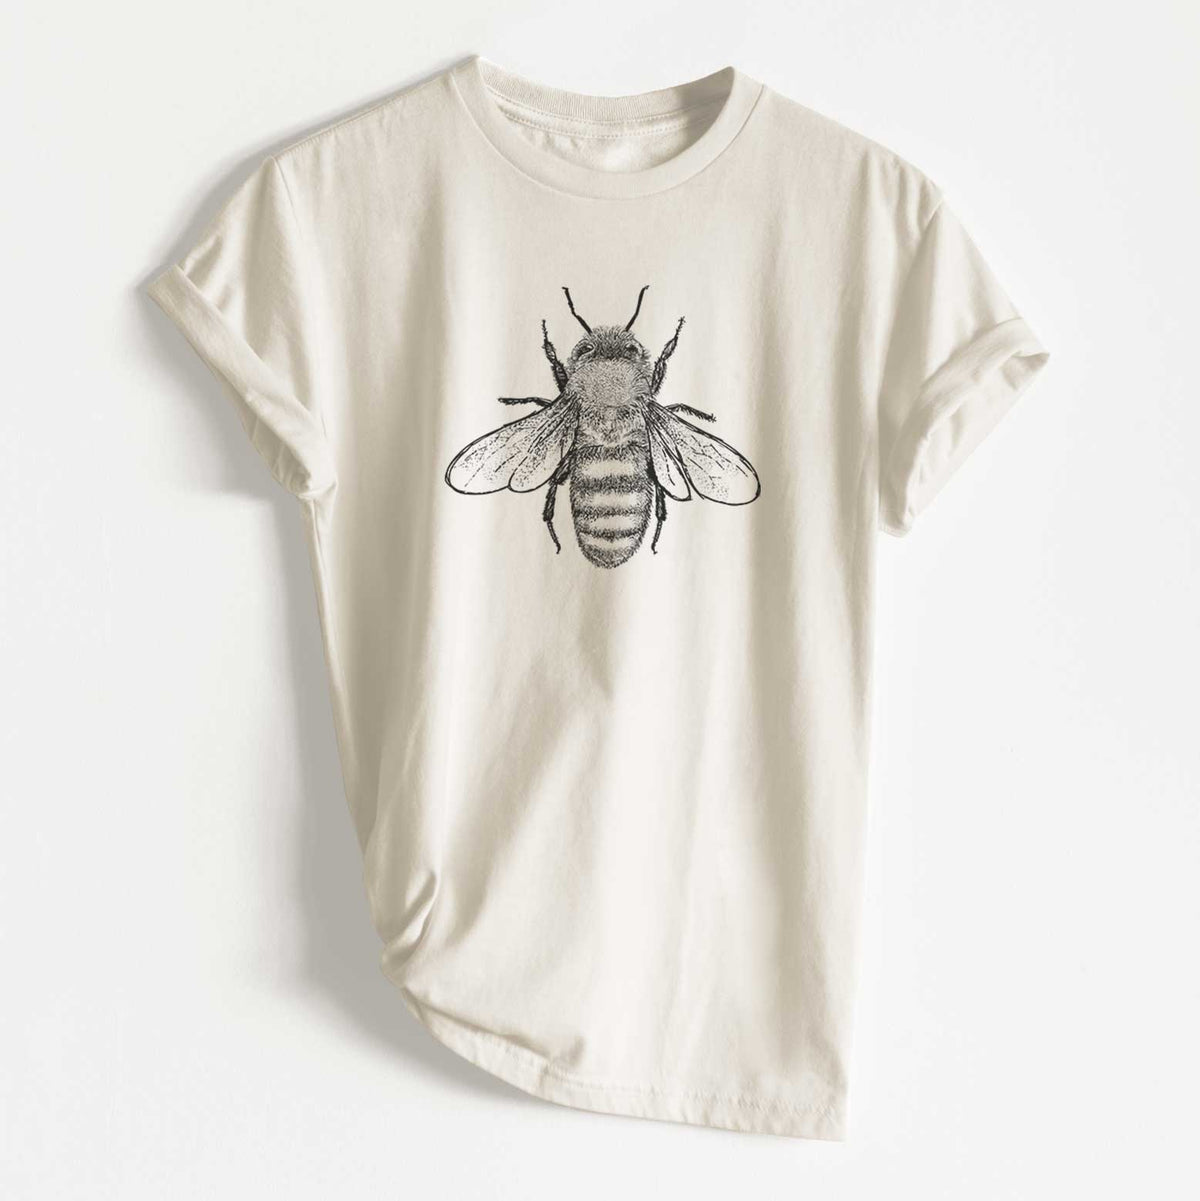 Apis Mellifera - Honey Bee - Unisex Recycled Eco Tee  - CLOSEOUT - FINAL SALE